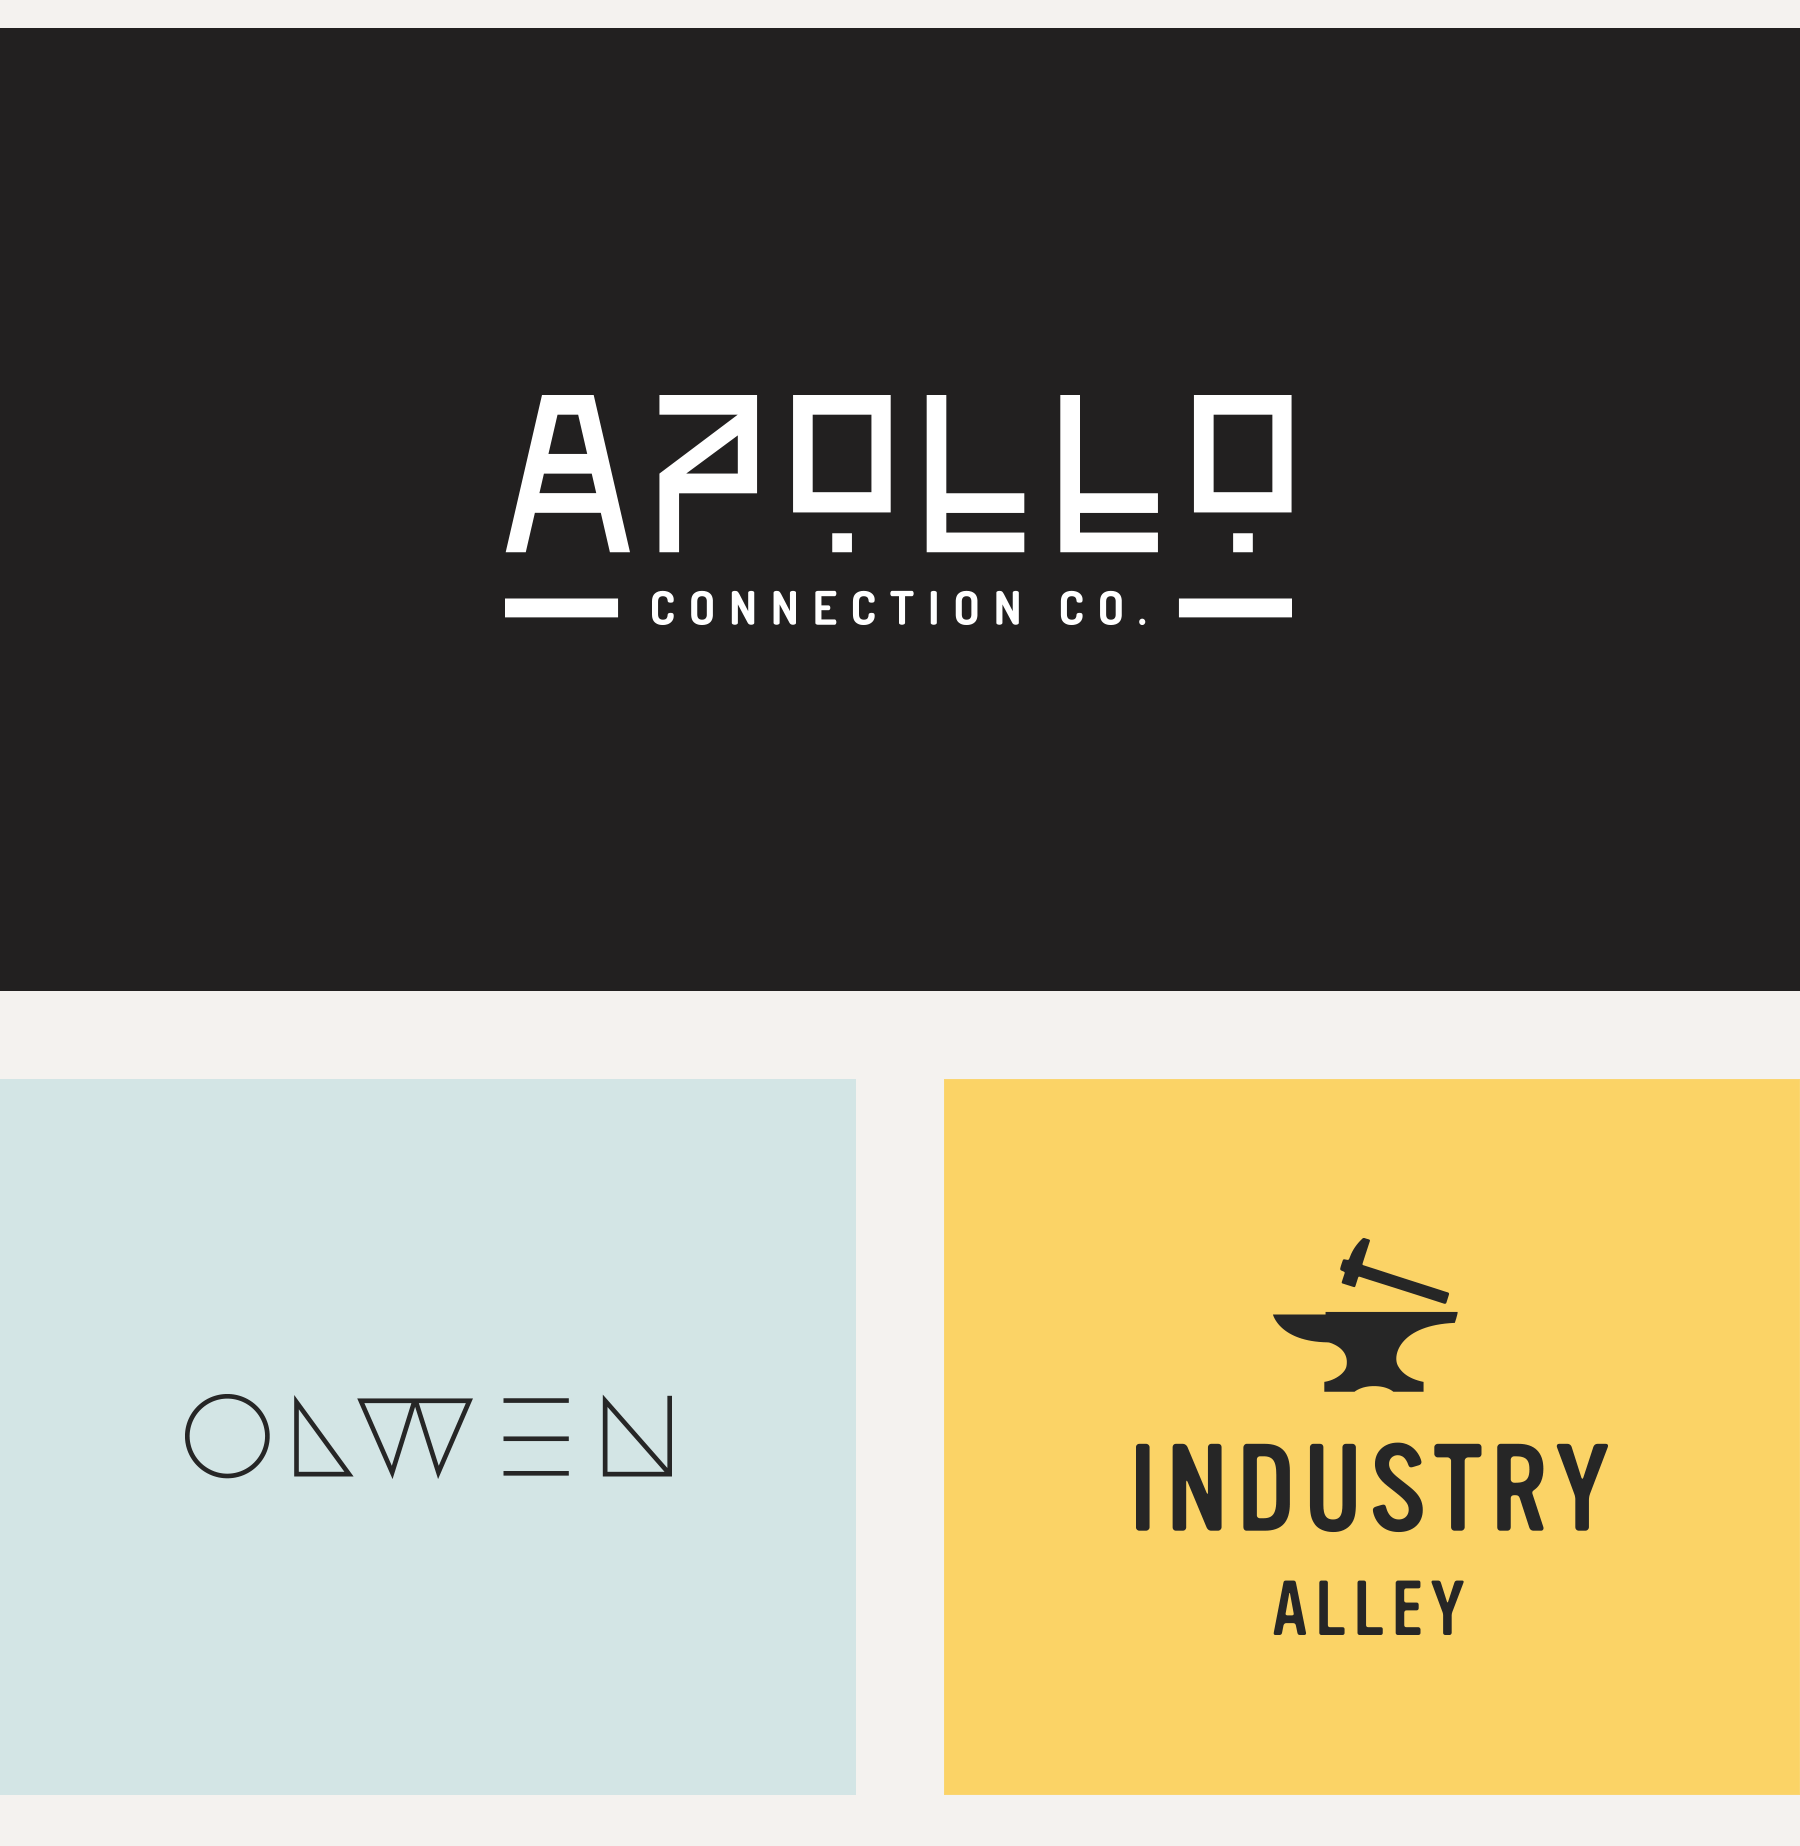 Animated logo variations of Apollo Connection Co, Olwen Jewelry, and Industry Alley which includes a custom anvil icon.